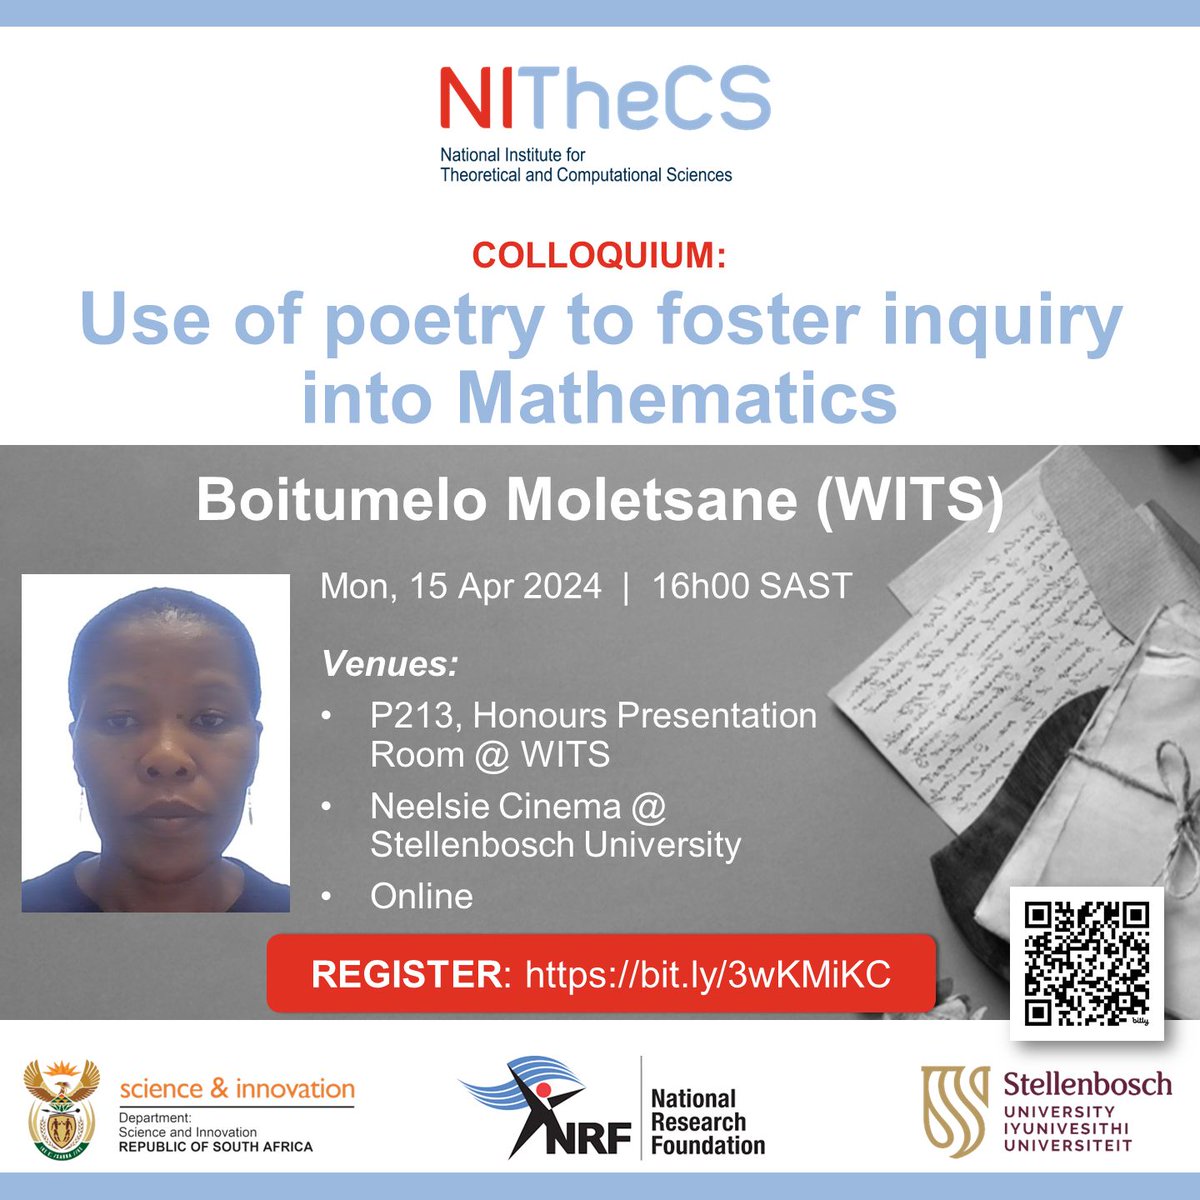 NITheCS Colloquium: 'Use of poetry to foster inquiry into Mathematics' - Boitumelo Moletsane (WITS) - Mon, 15 Apr @ 16h00. Attend in person or online. buff.ly/3JdxBmk #poetry #mathematics #mathpoetry